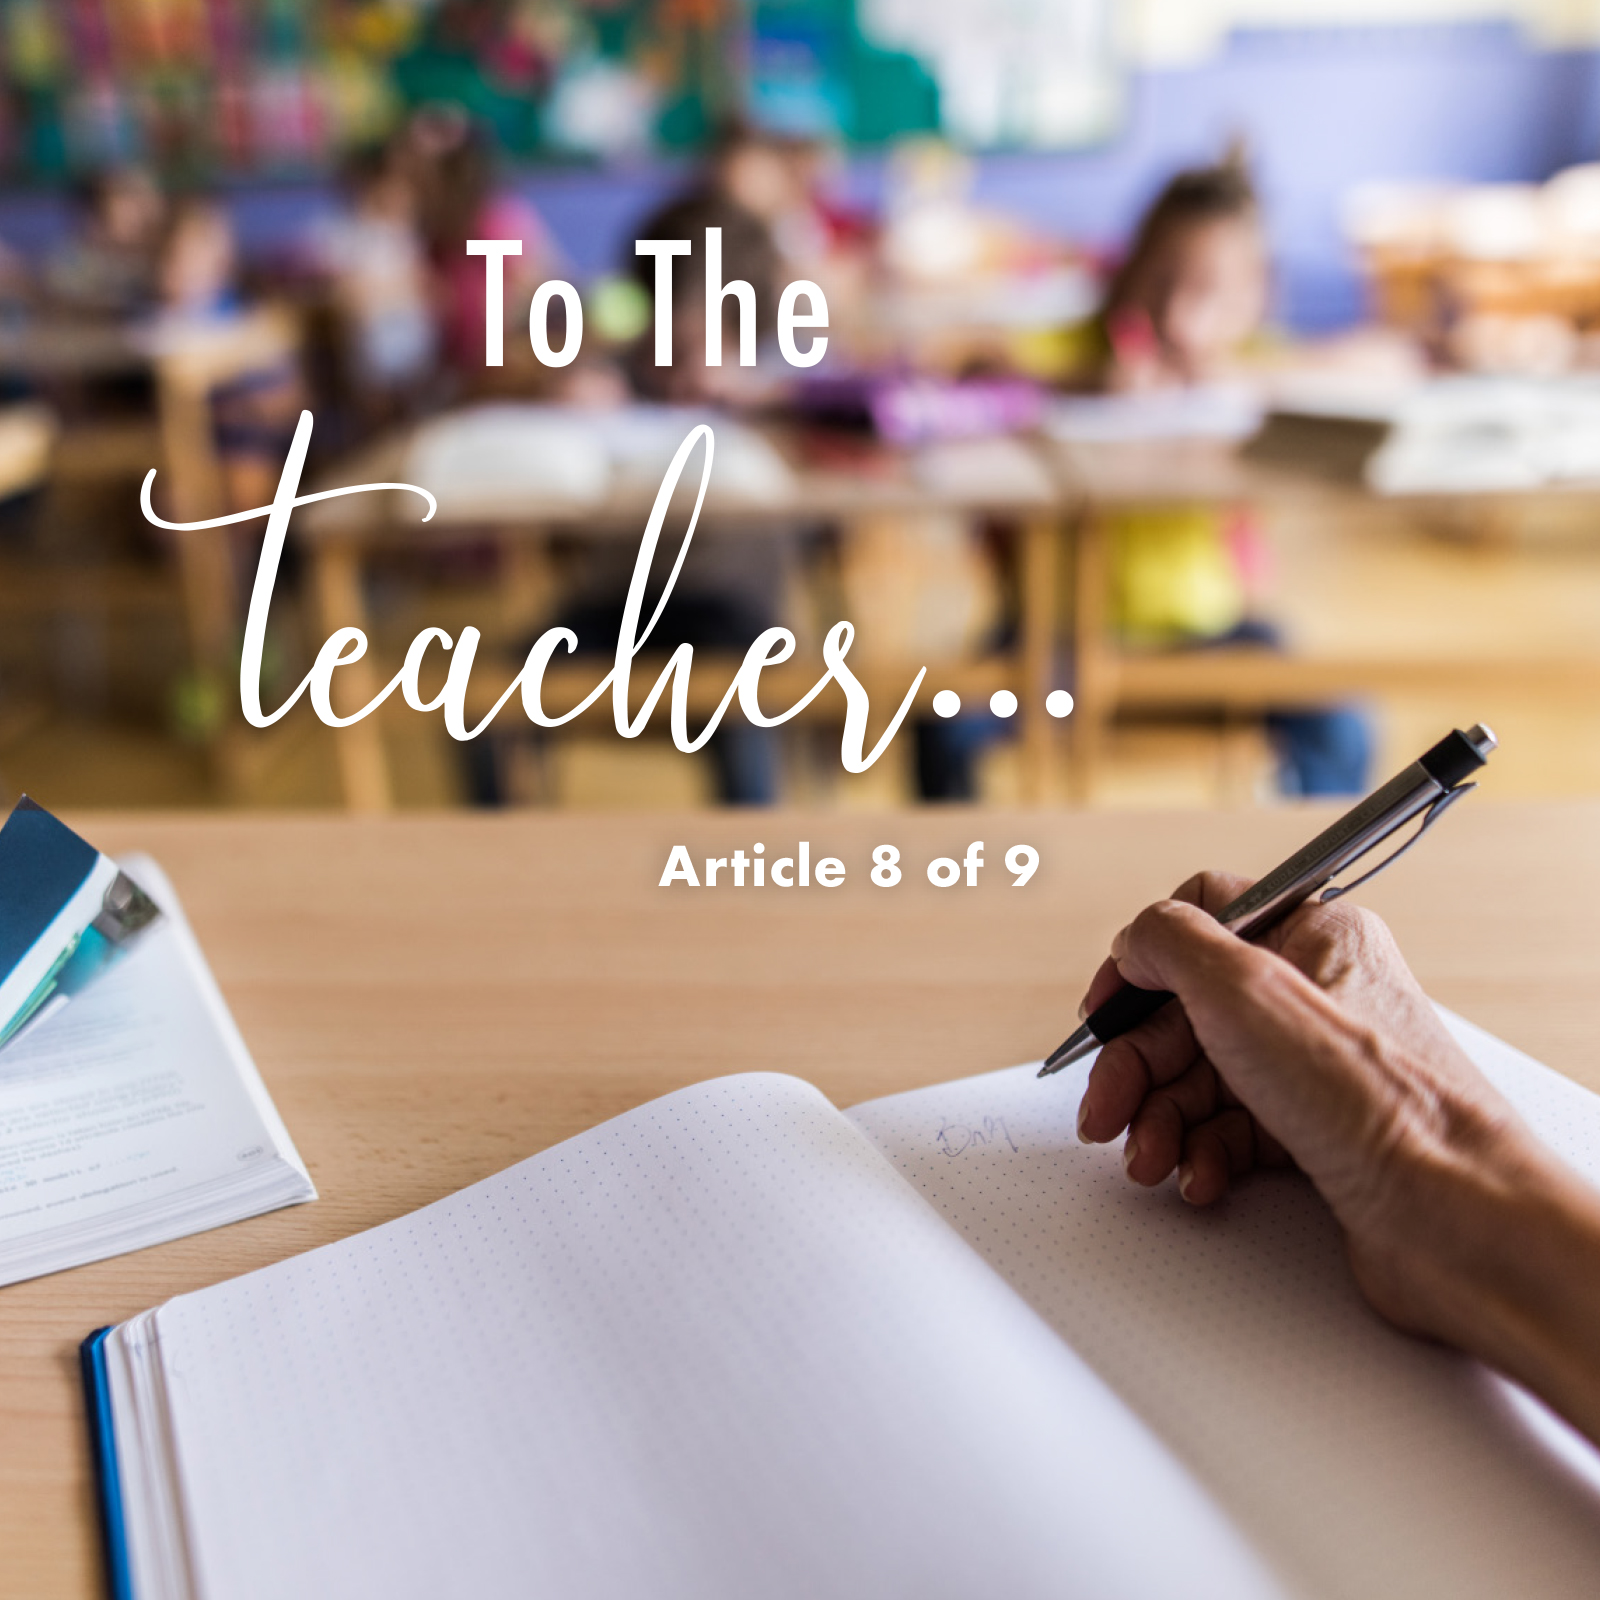 Image for 'To the Teacher…'